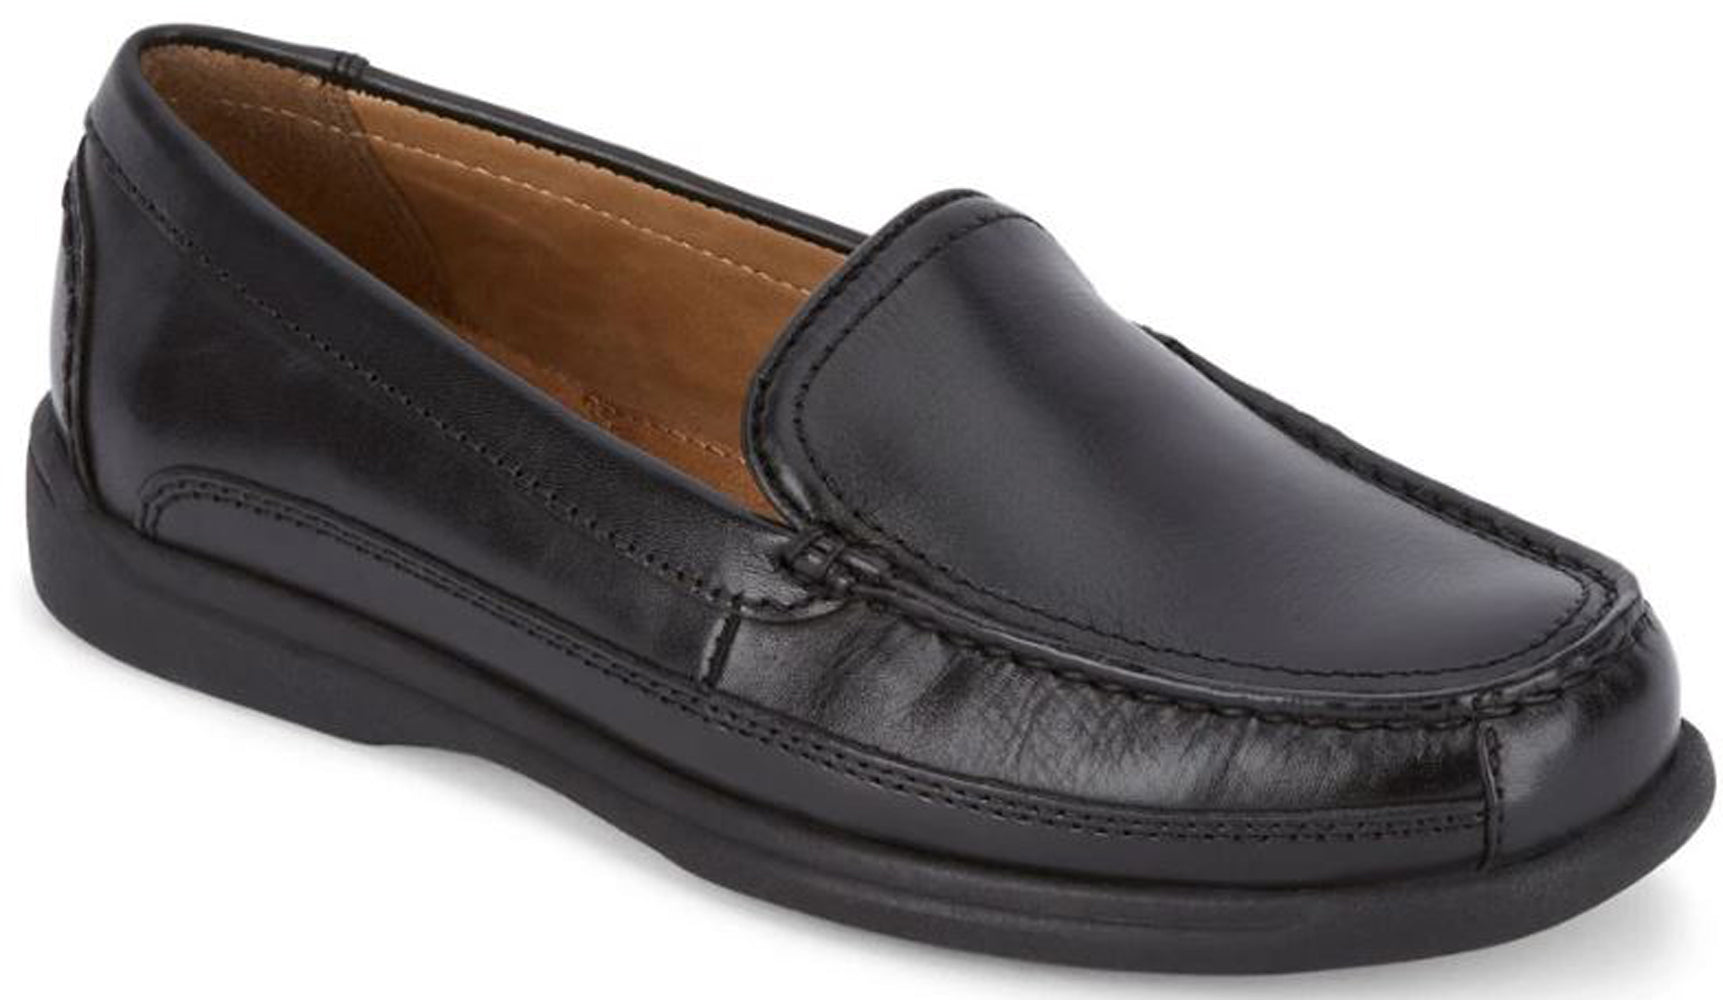 Dockers Footwear Men's Catalina Casual Loafer Shoe in Black Side Angle View